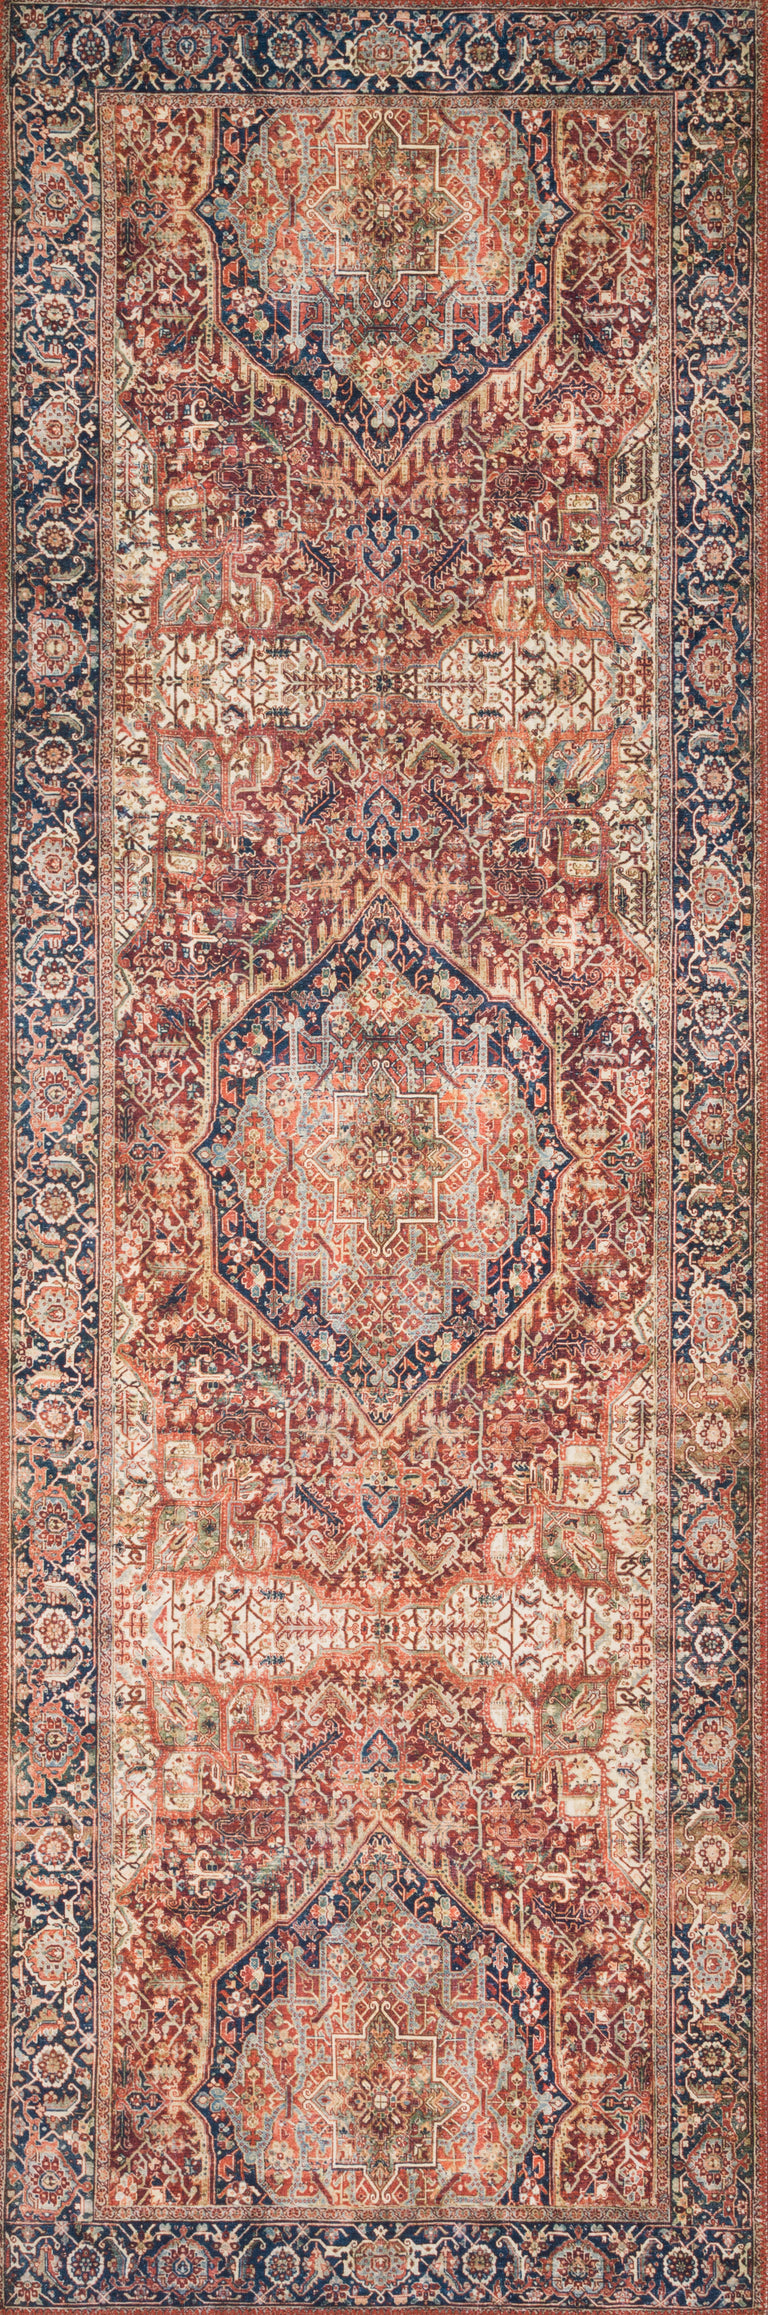 Loloi II Layla Collection Rug in Red, Navy - 2'3" x 3'9"